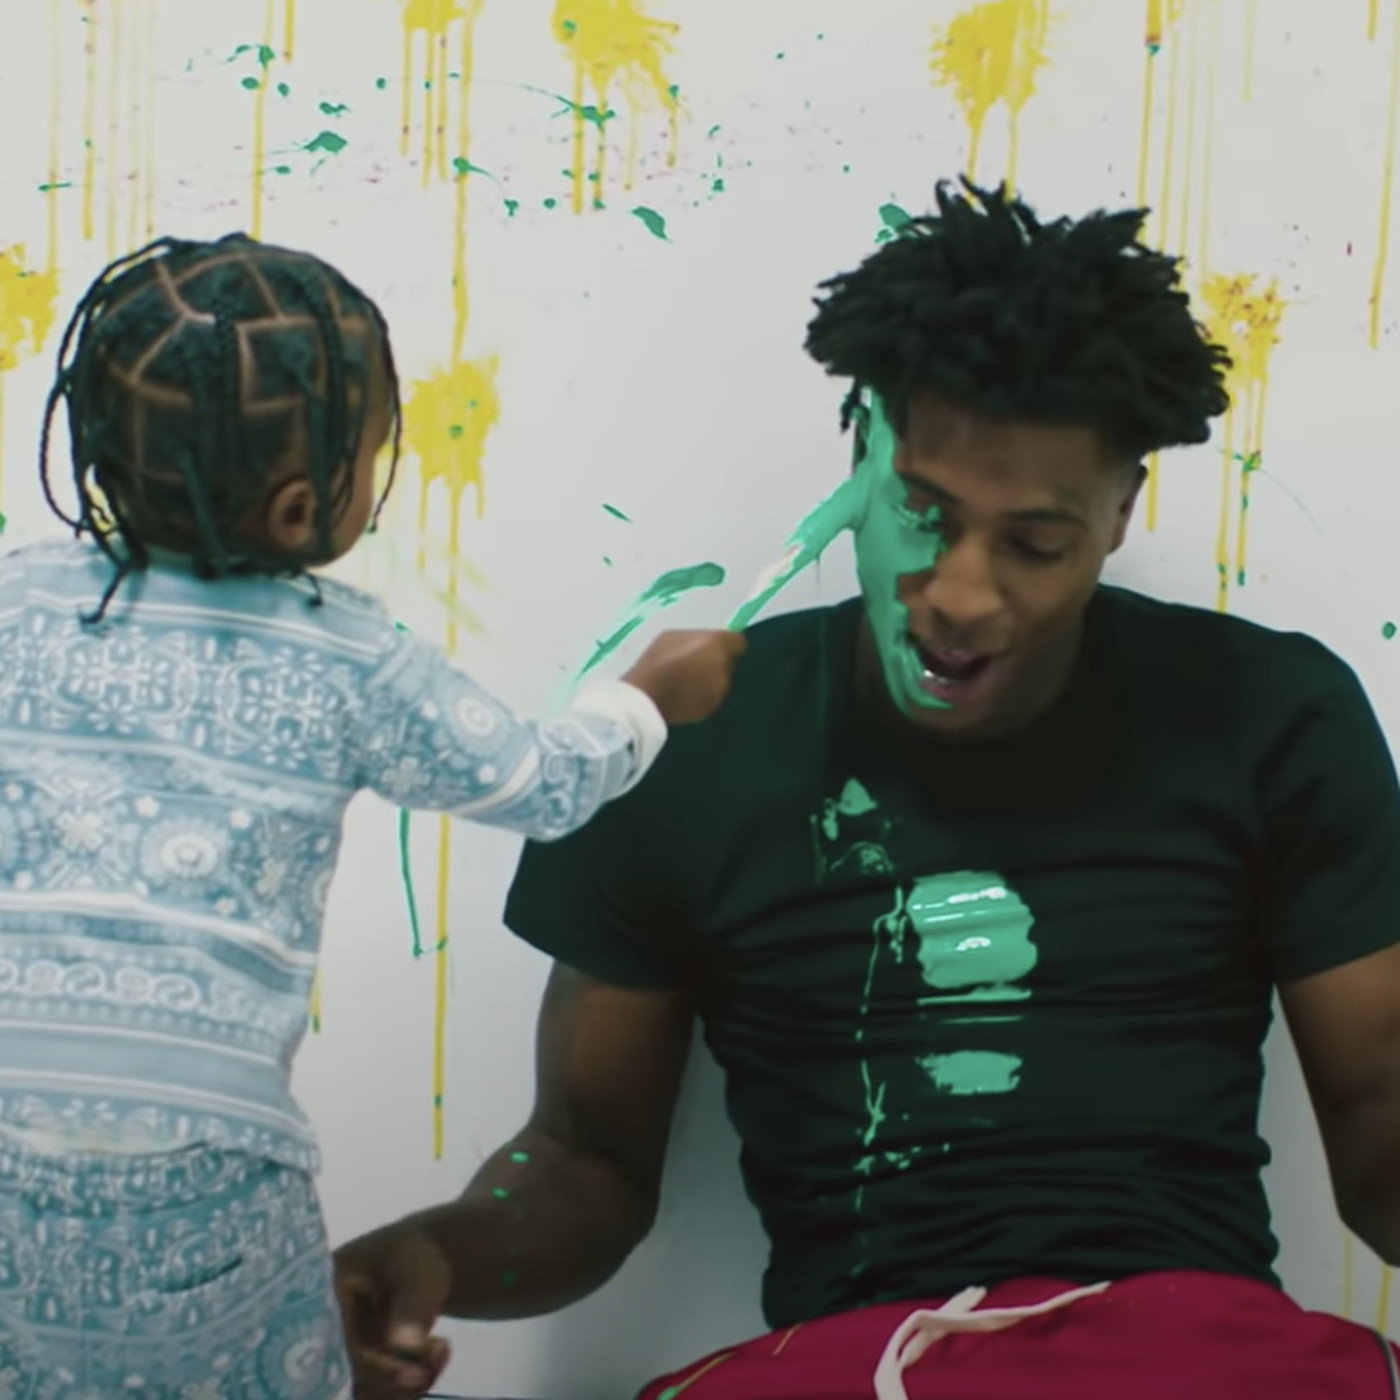 YoungBoy Never Broke Again hangs with his children in “Kacey Talk” video